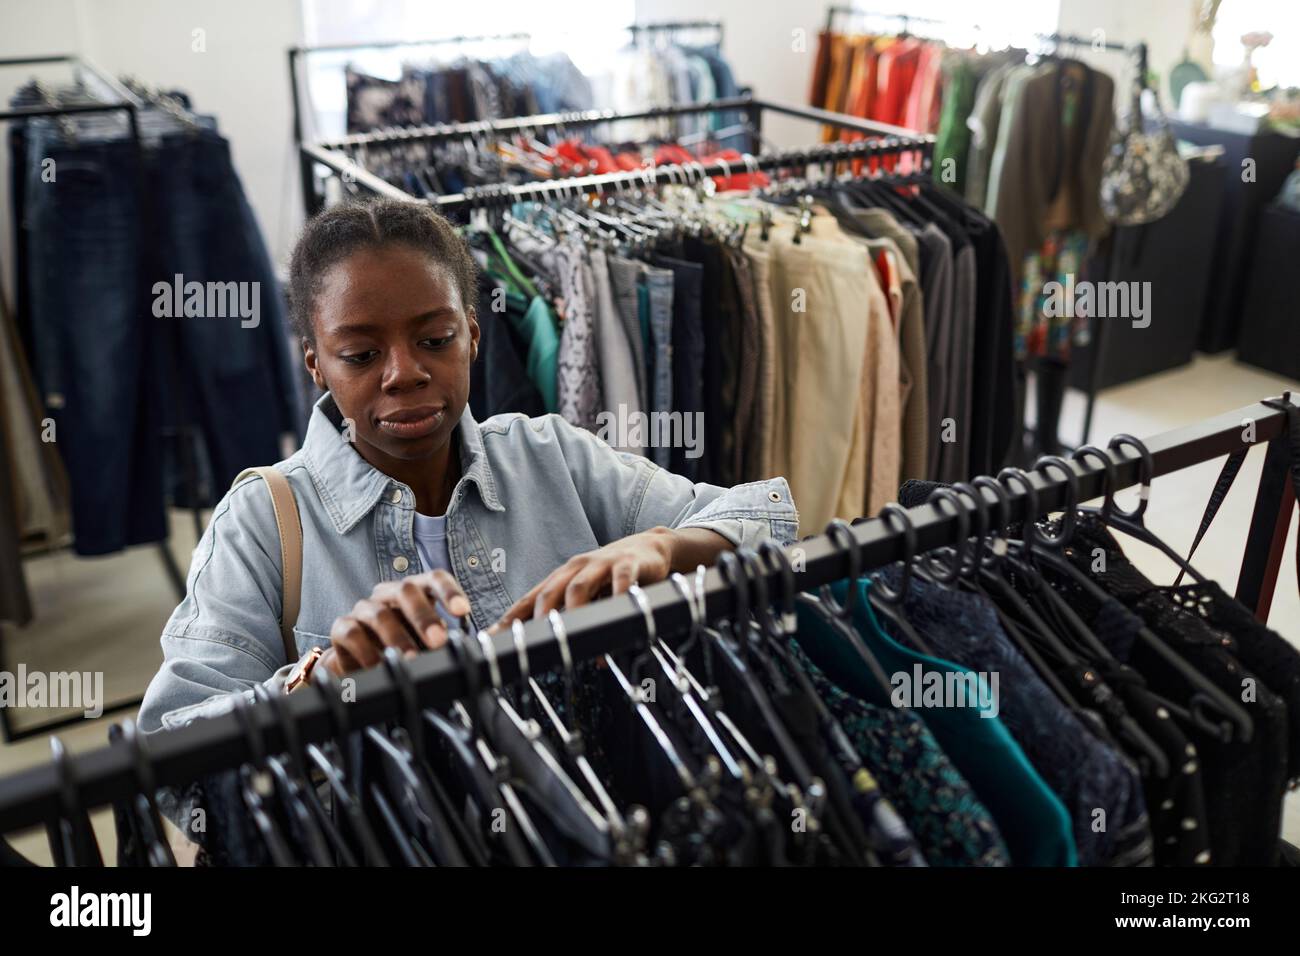 High angle portrait of black young woman looking at clothes while shopping for deals in thrift store Stock Photo